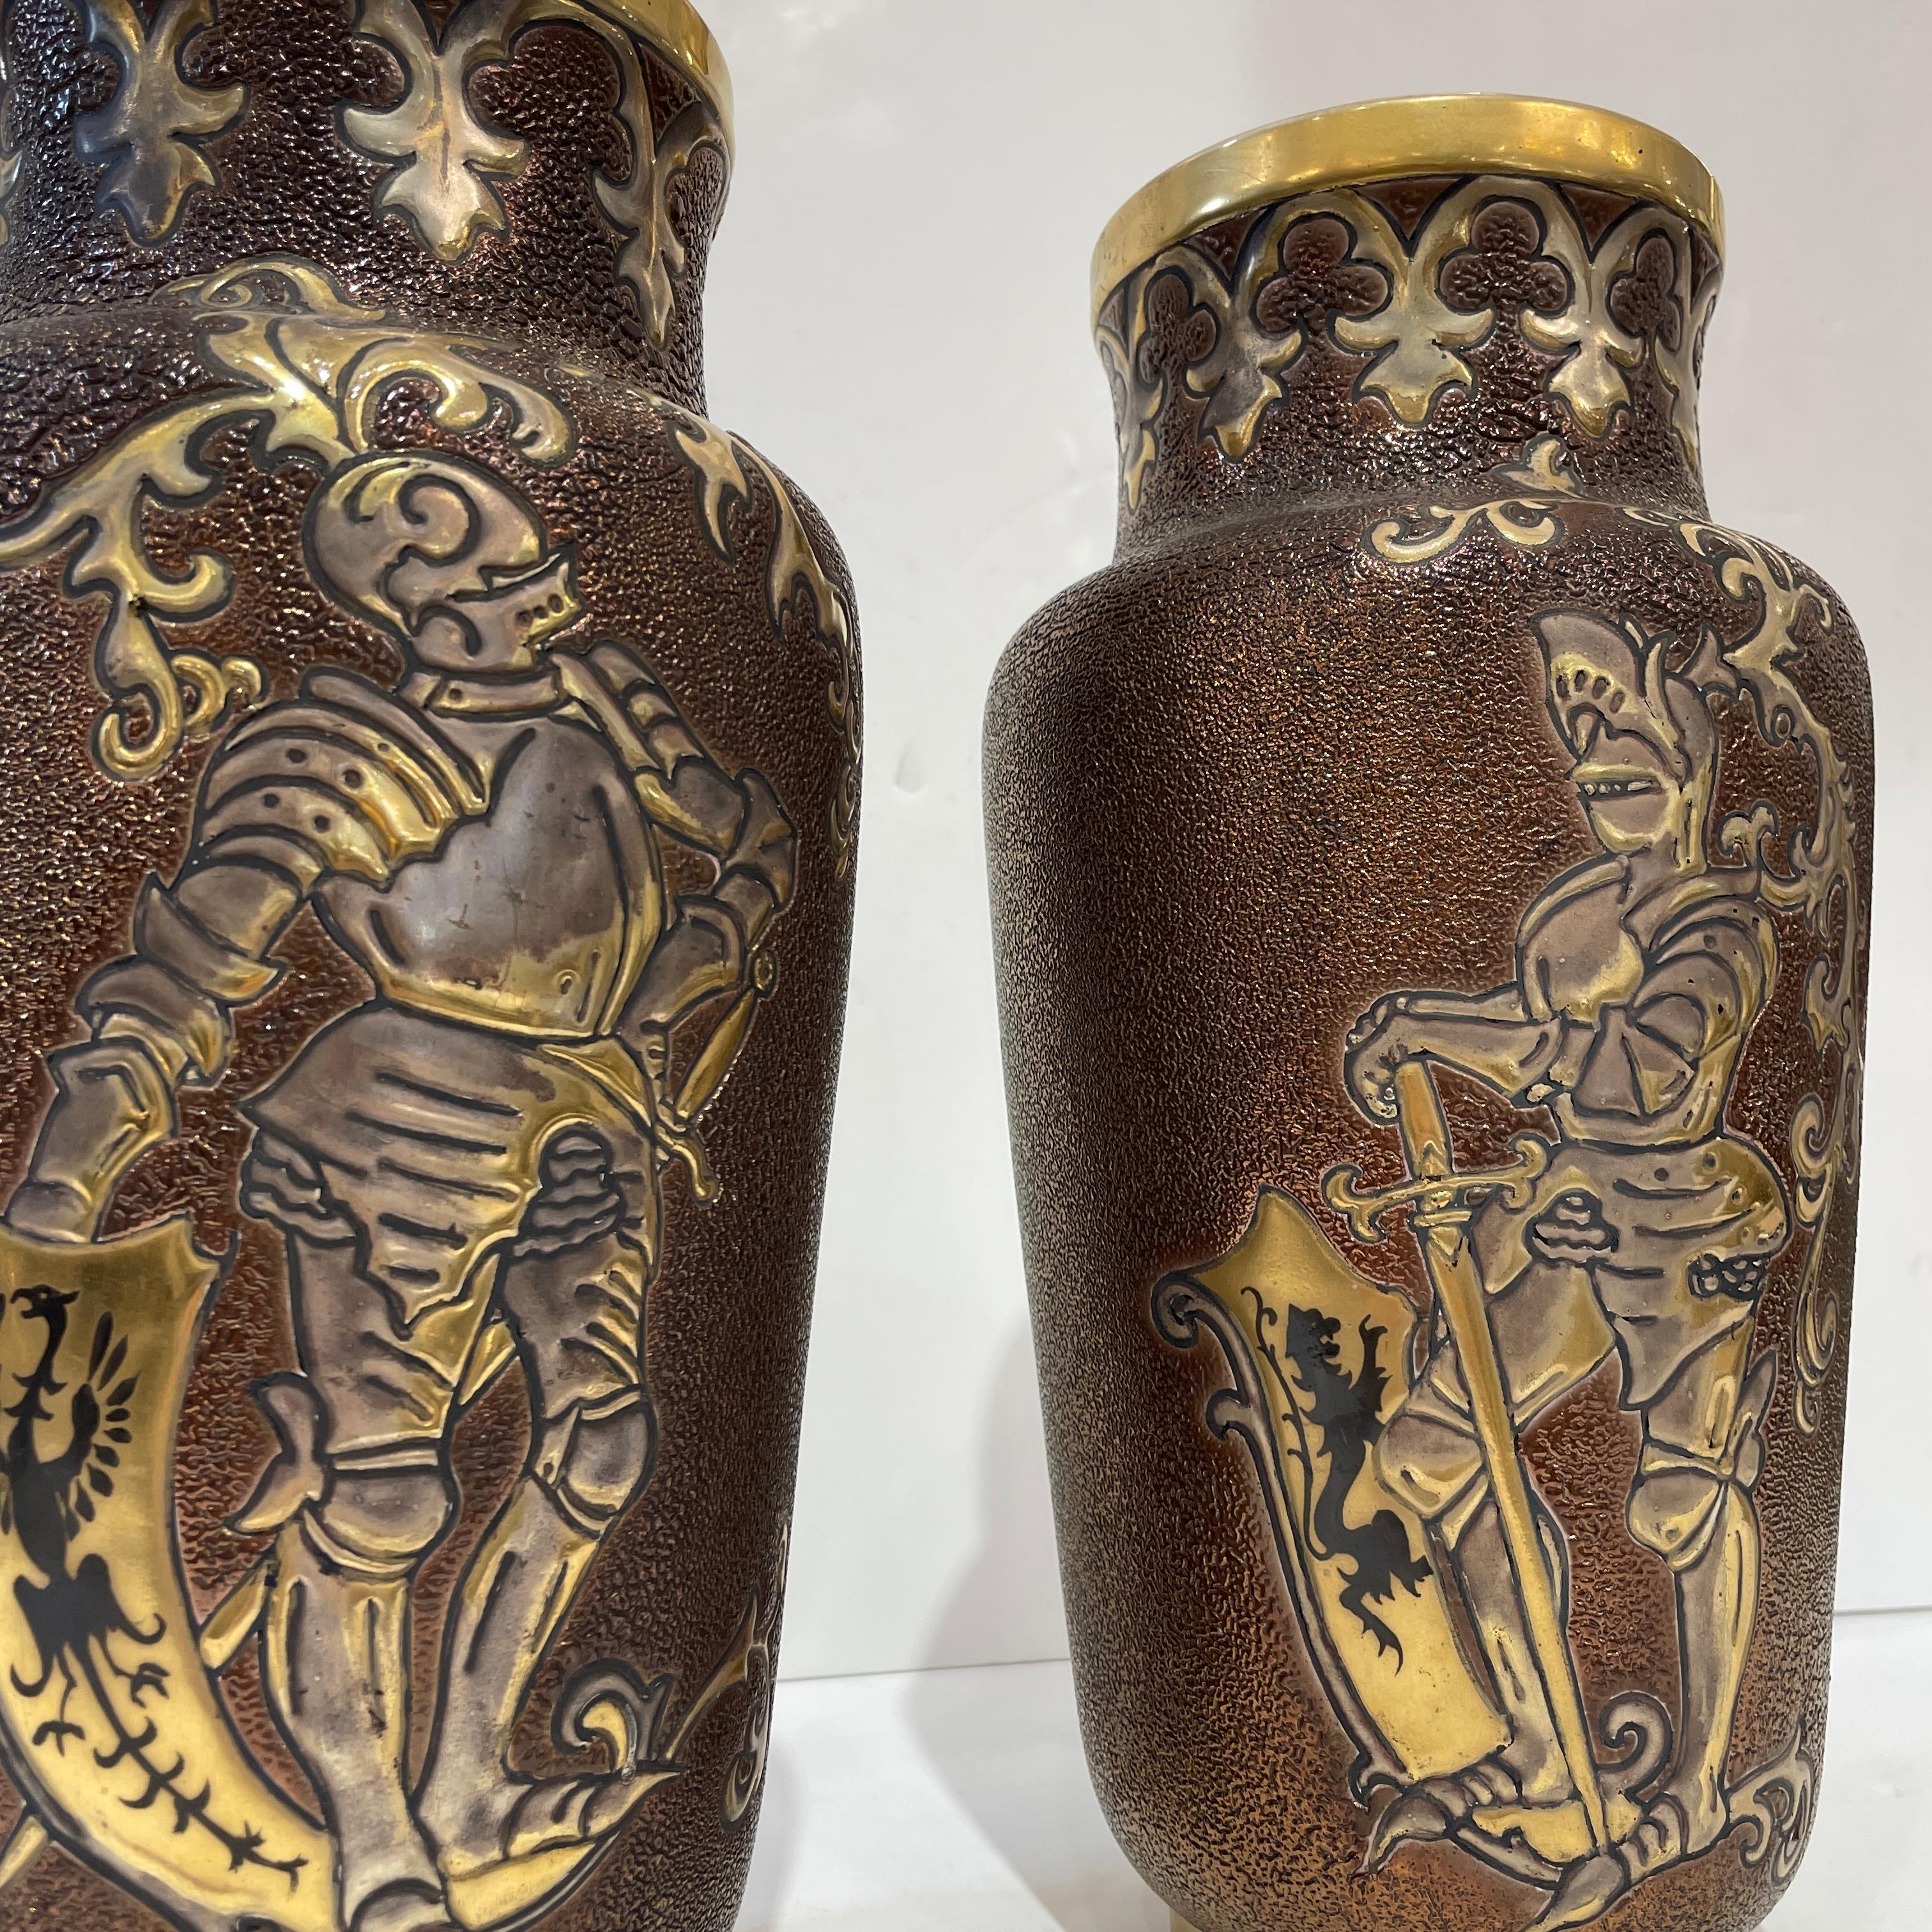 1880 Gien French Faience Pair Majolica Gold Chocolate Vases with Armored Knights For Sale 1